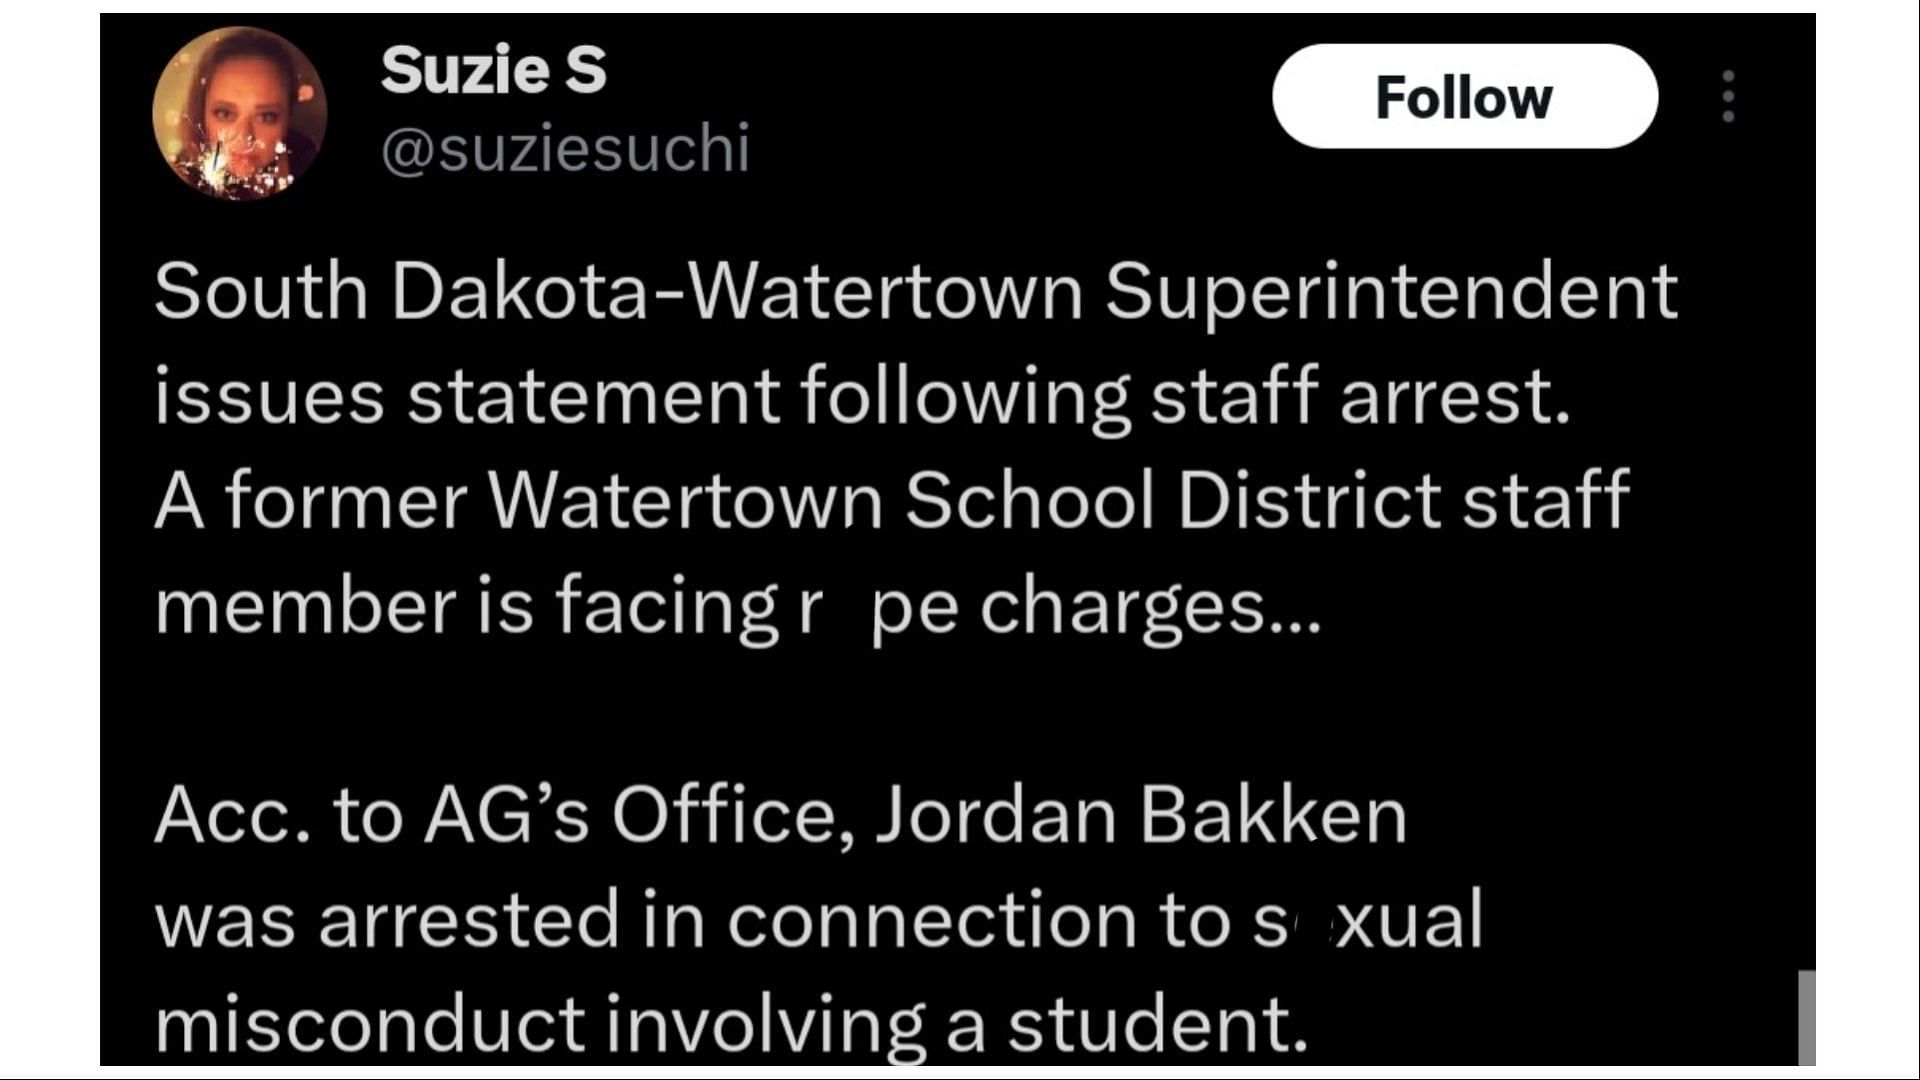 Jordan Bakken allegedly established an inappropriate relationship with a student (Image via X/Suzie S/)